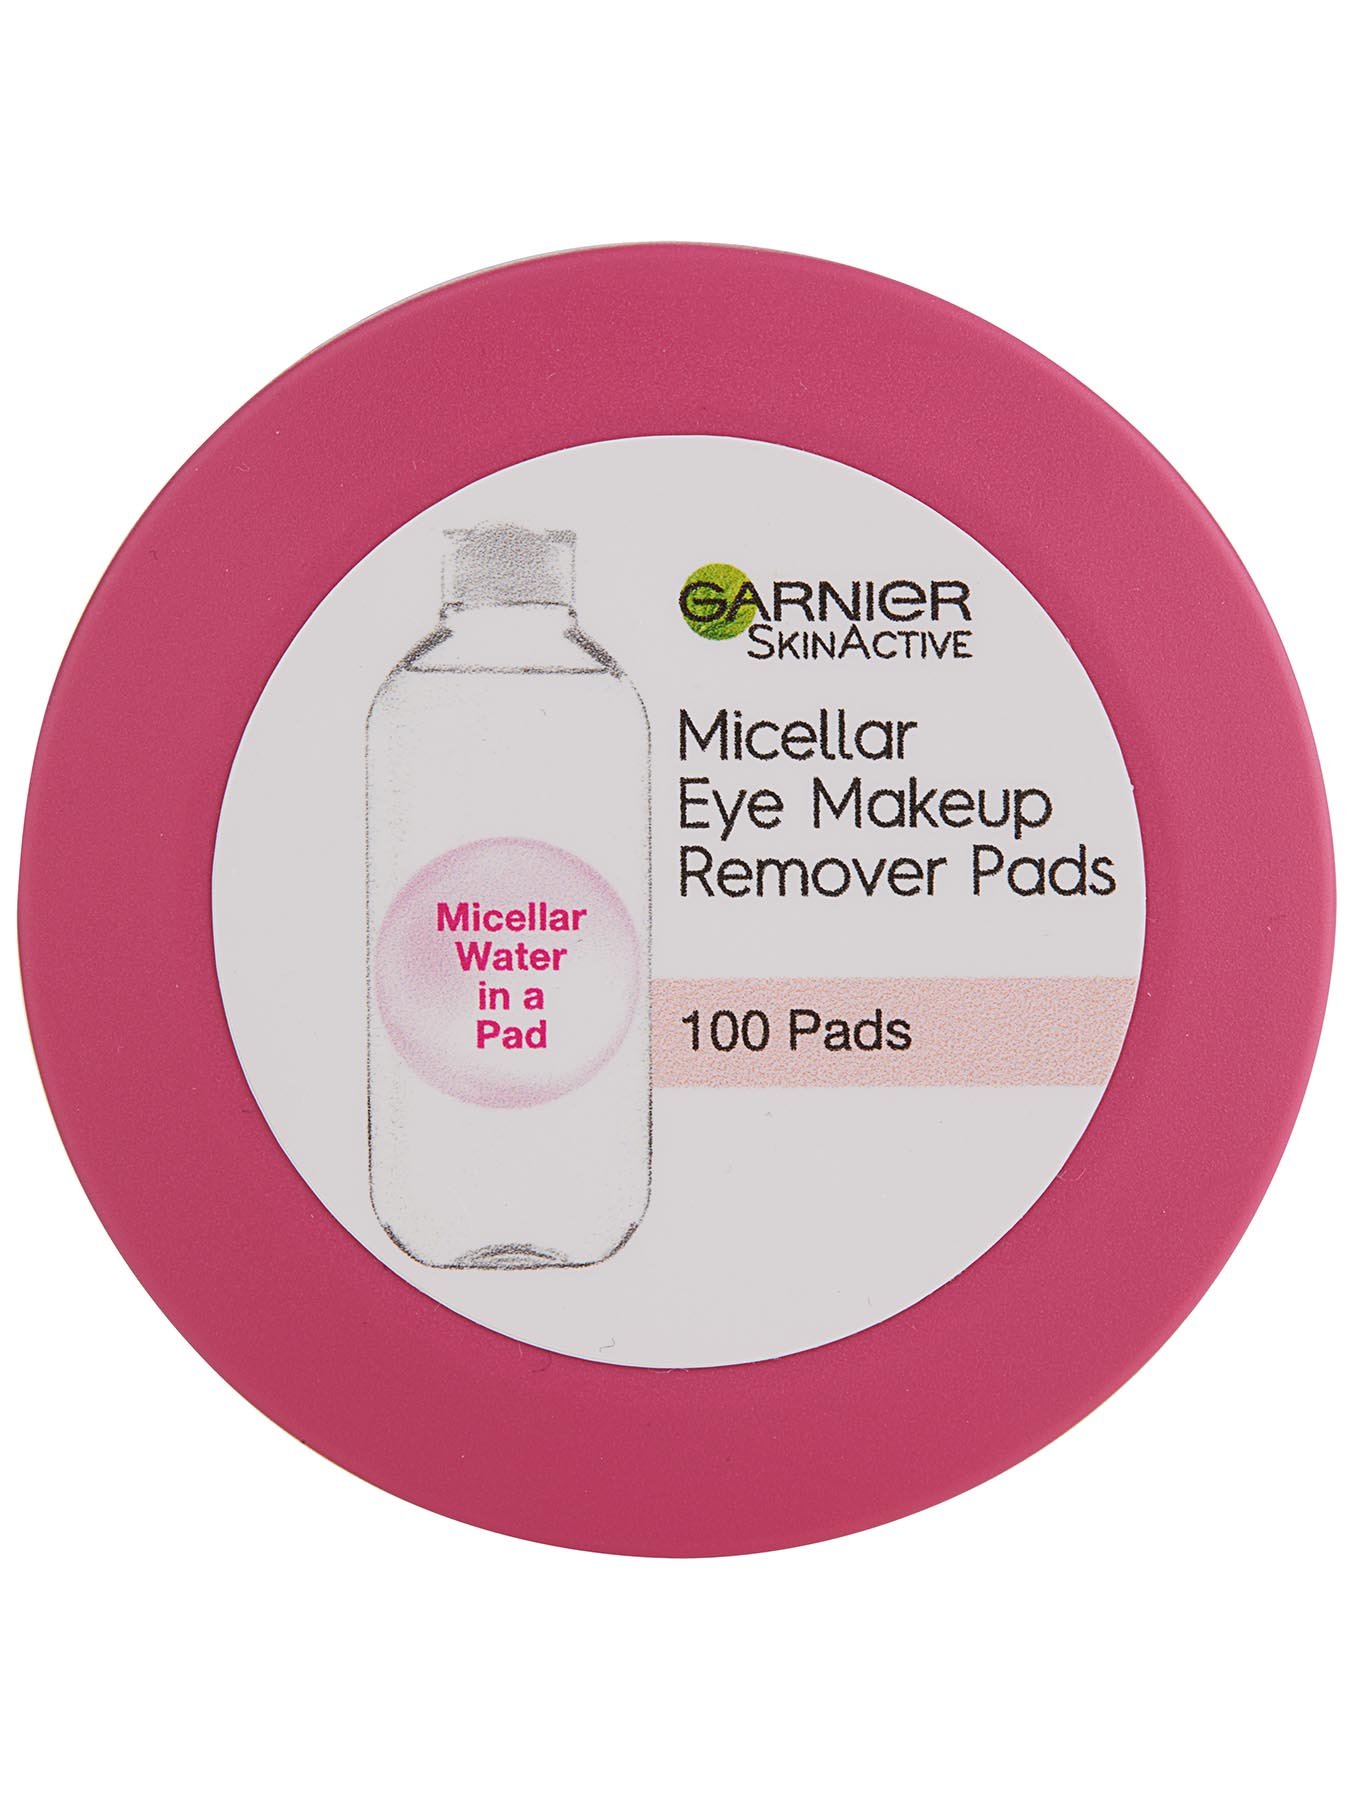 Top view of Micellar Eye Makeup Remover Pads.